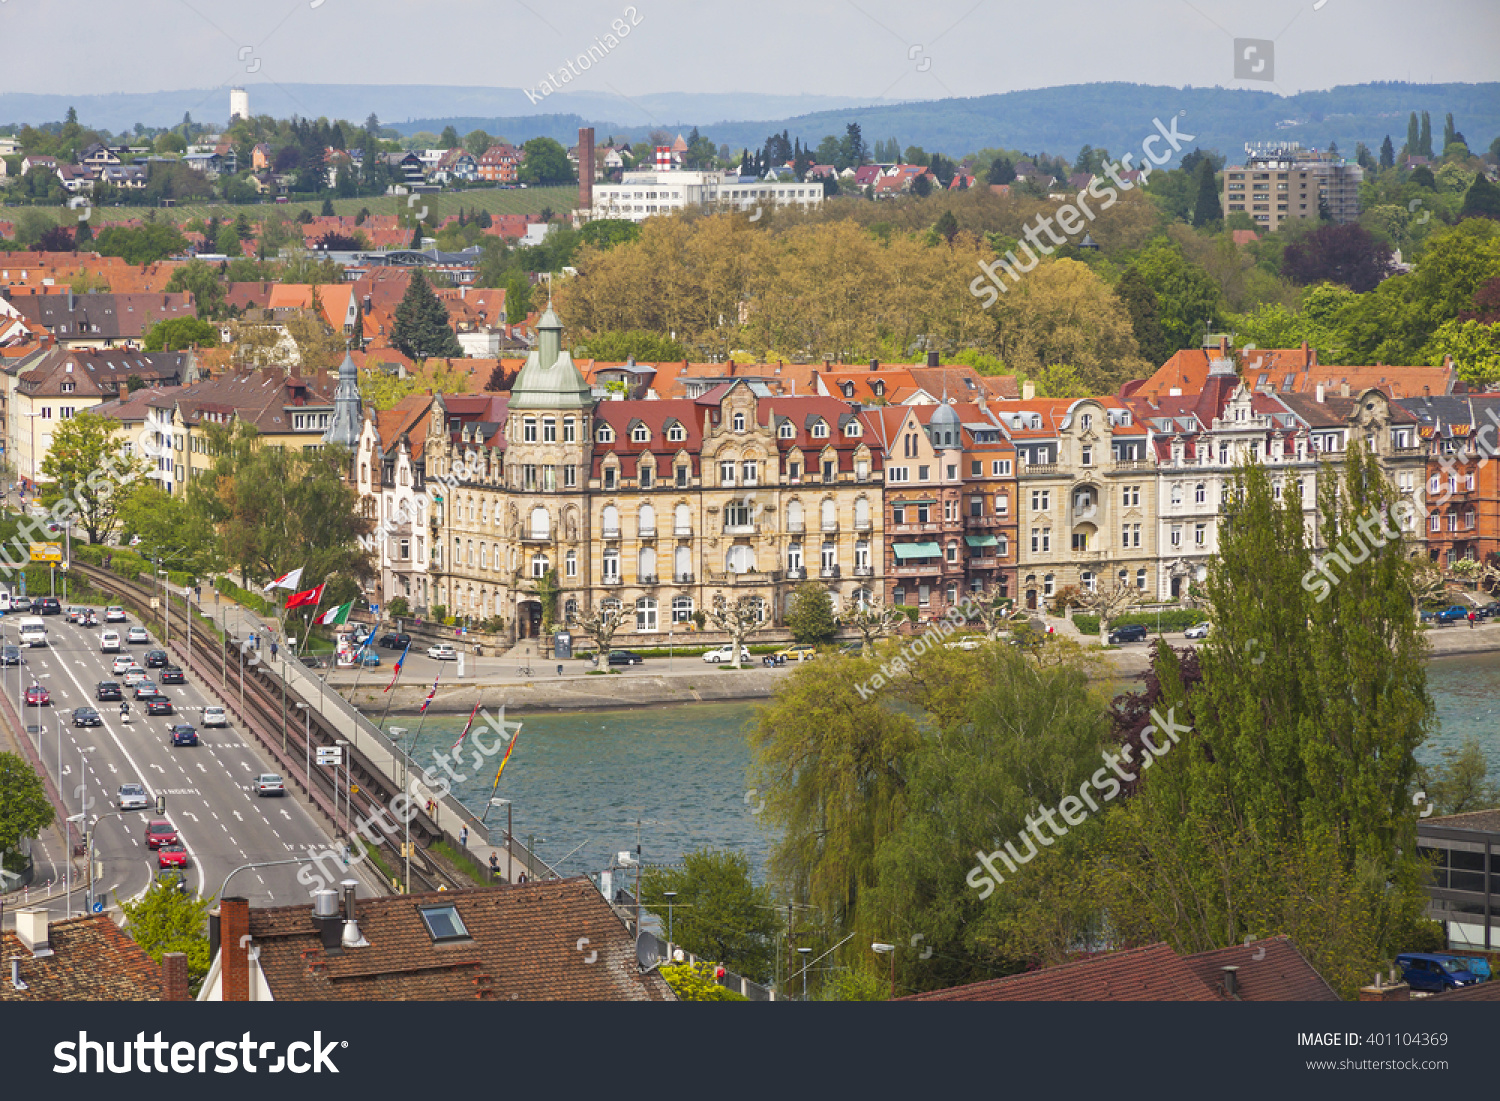 Aerial view of Konstanz city, Baden-Wurttemberg state, Germany #401104369